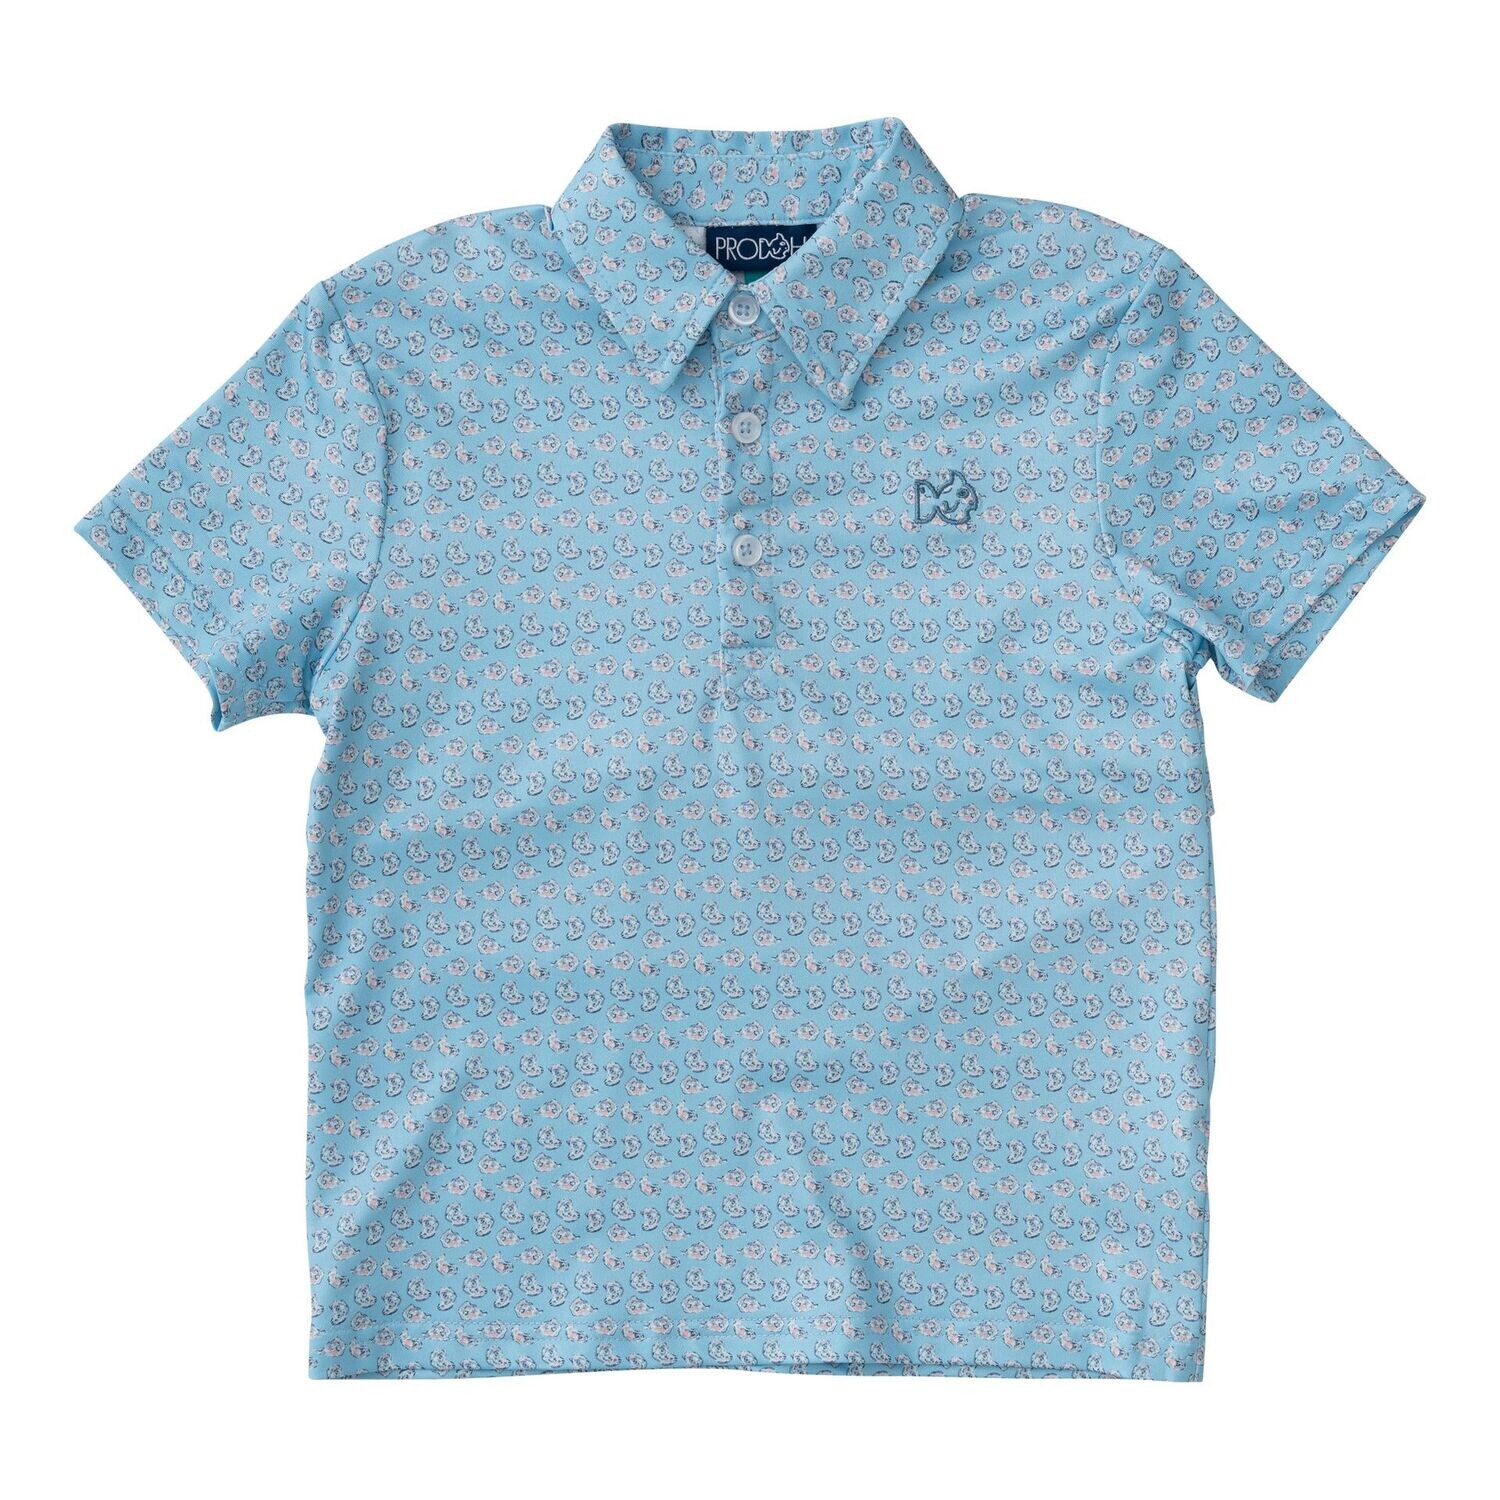 Pro Performance Polo-Oyster Print, Size: 2T